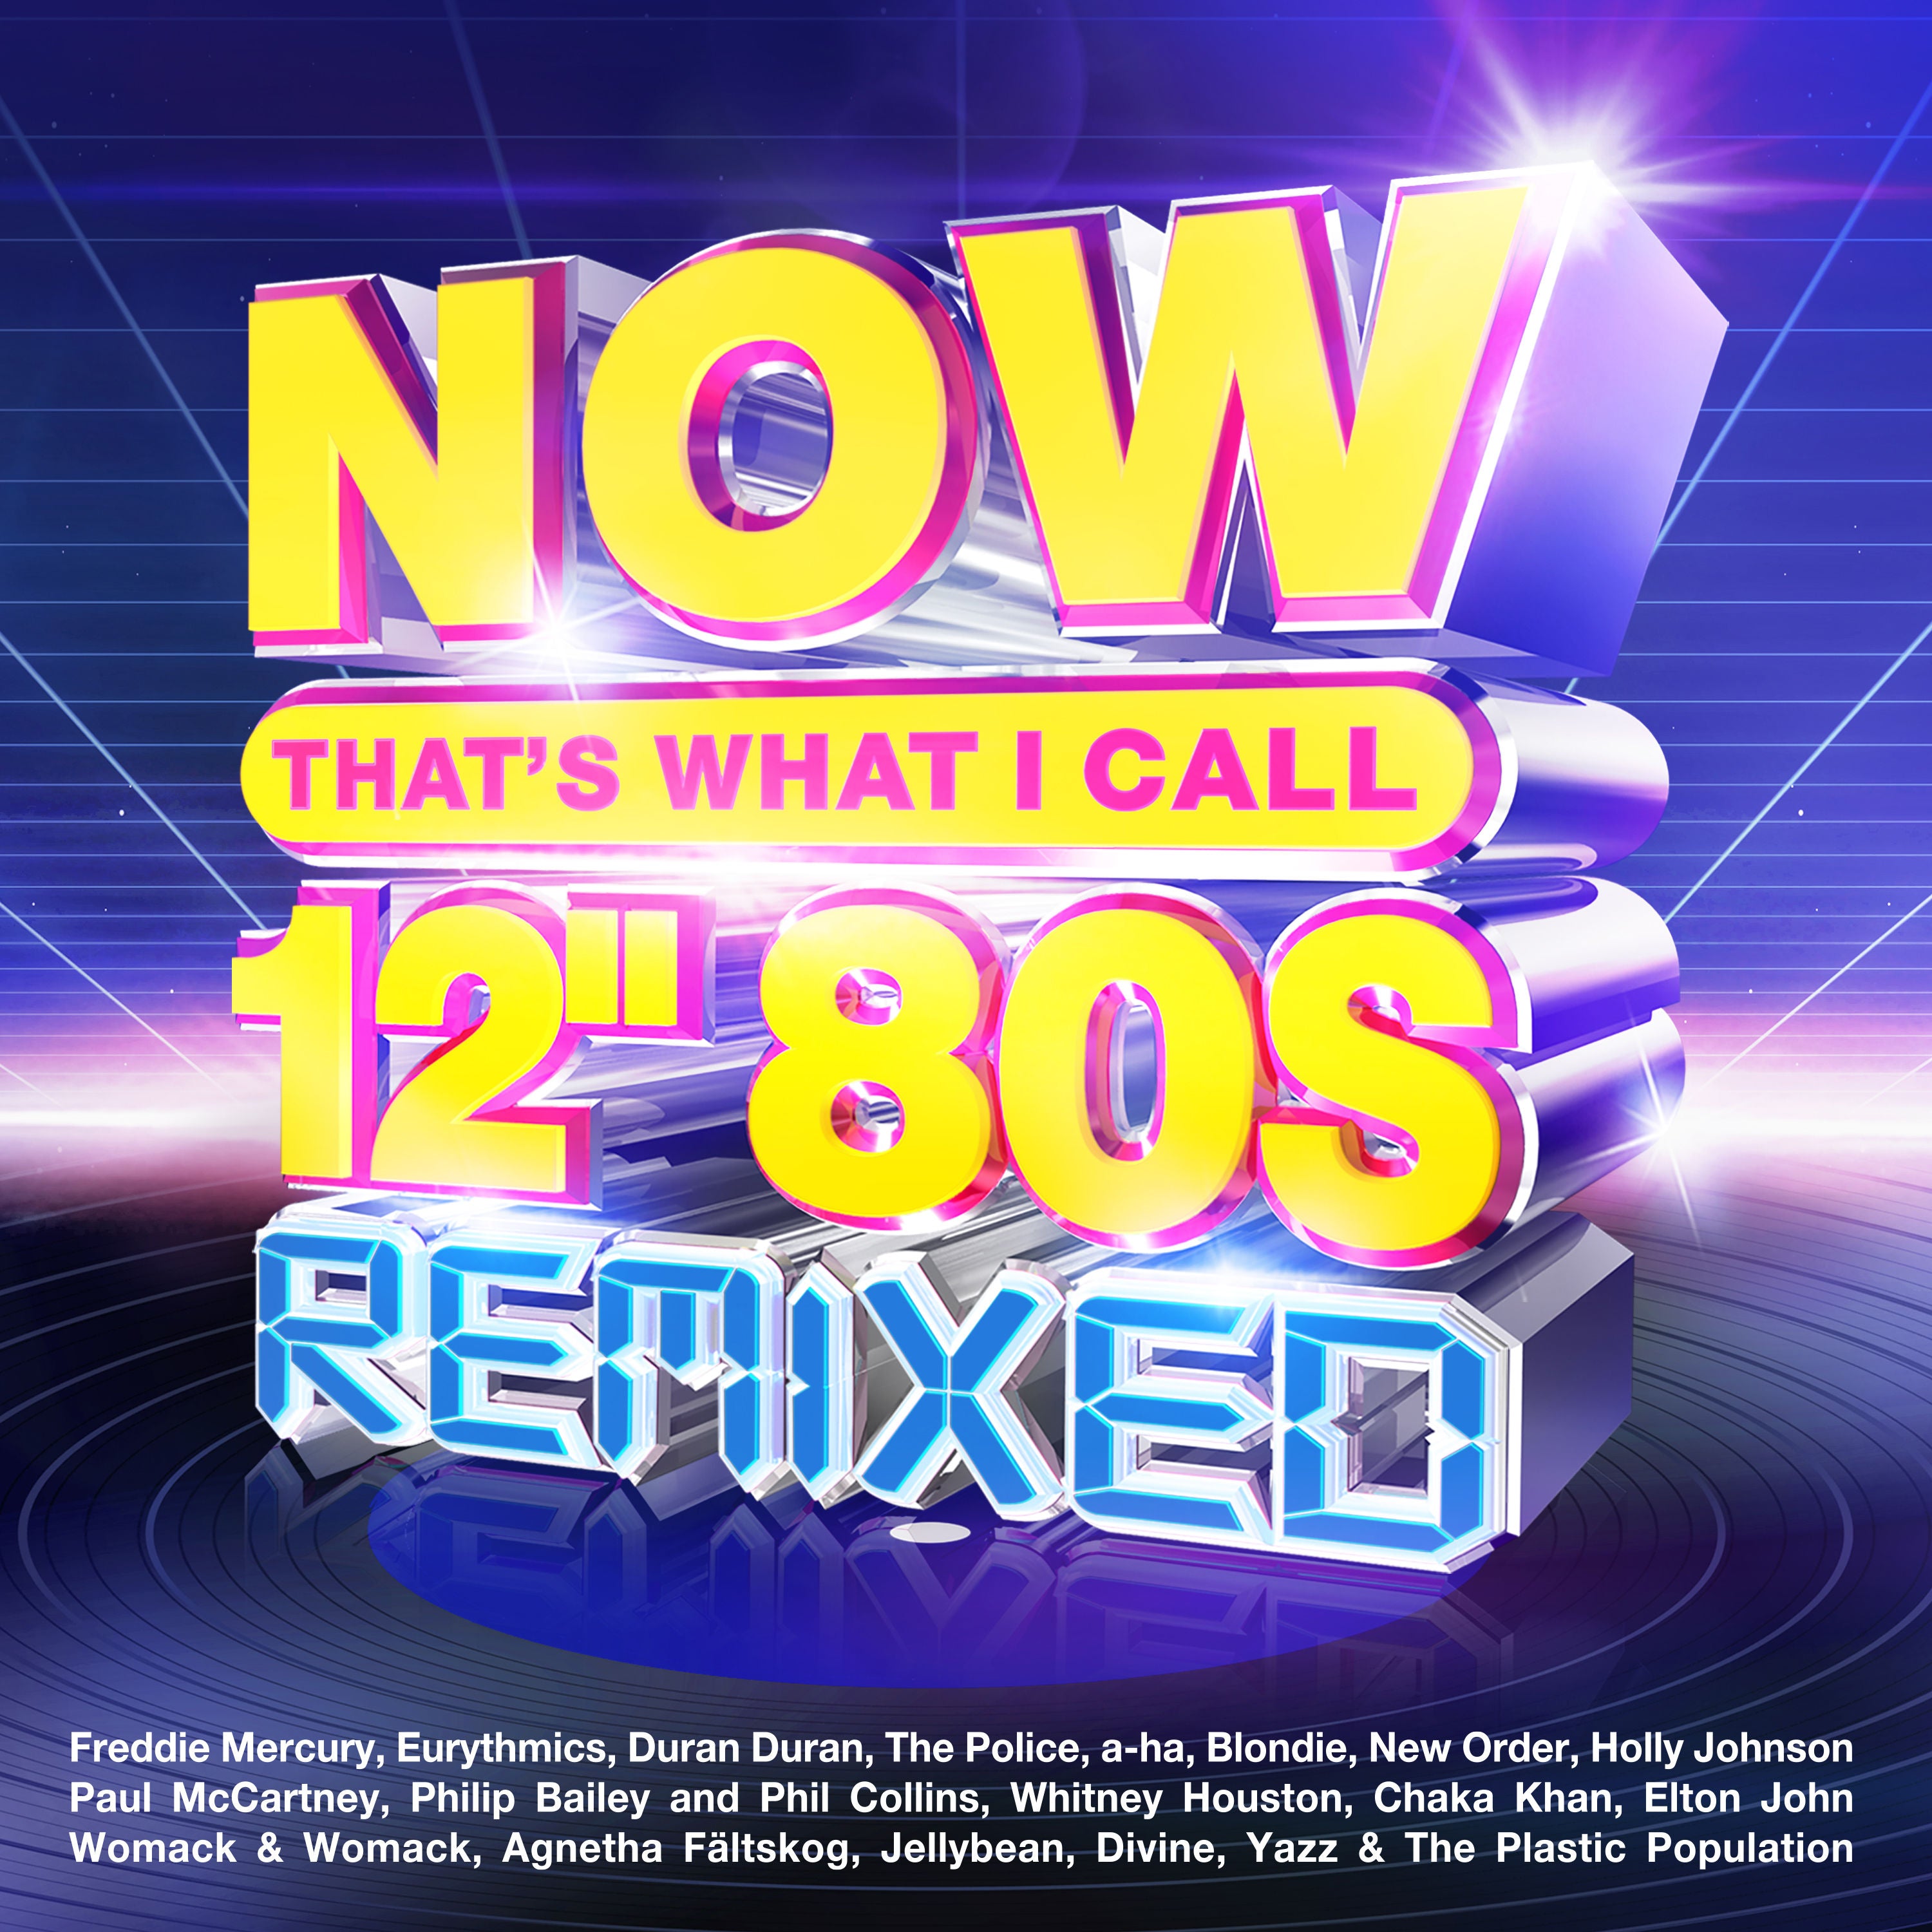 Various Artists - NOW That’s What I Call 12” 80s: Remixed (4CD)